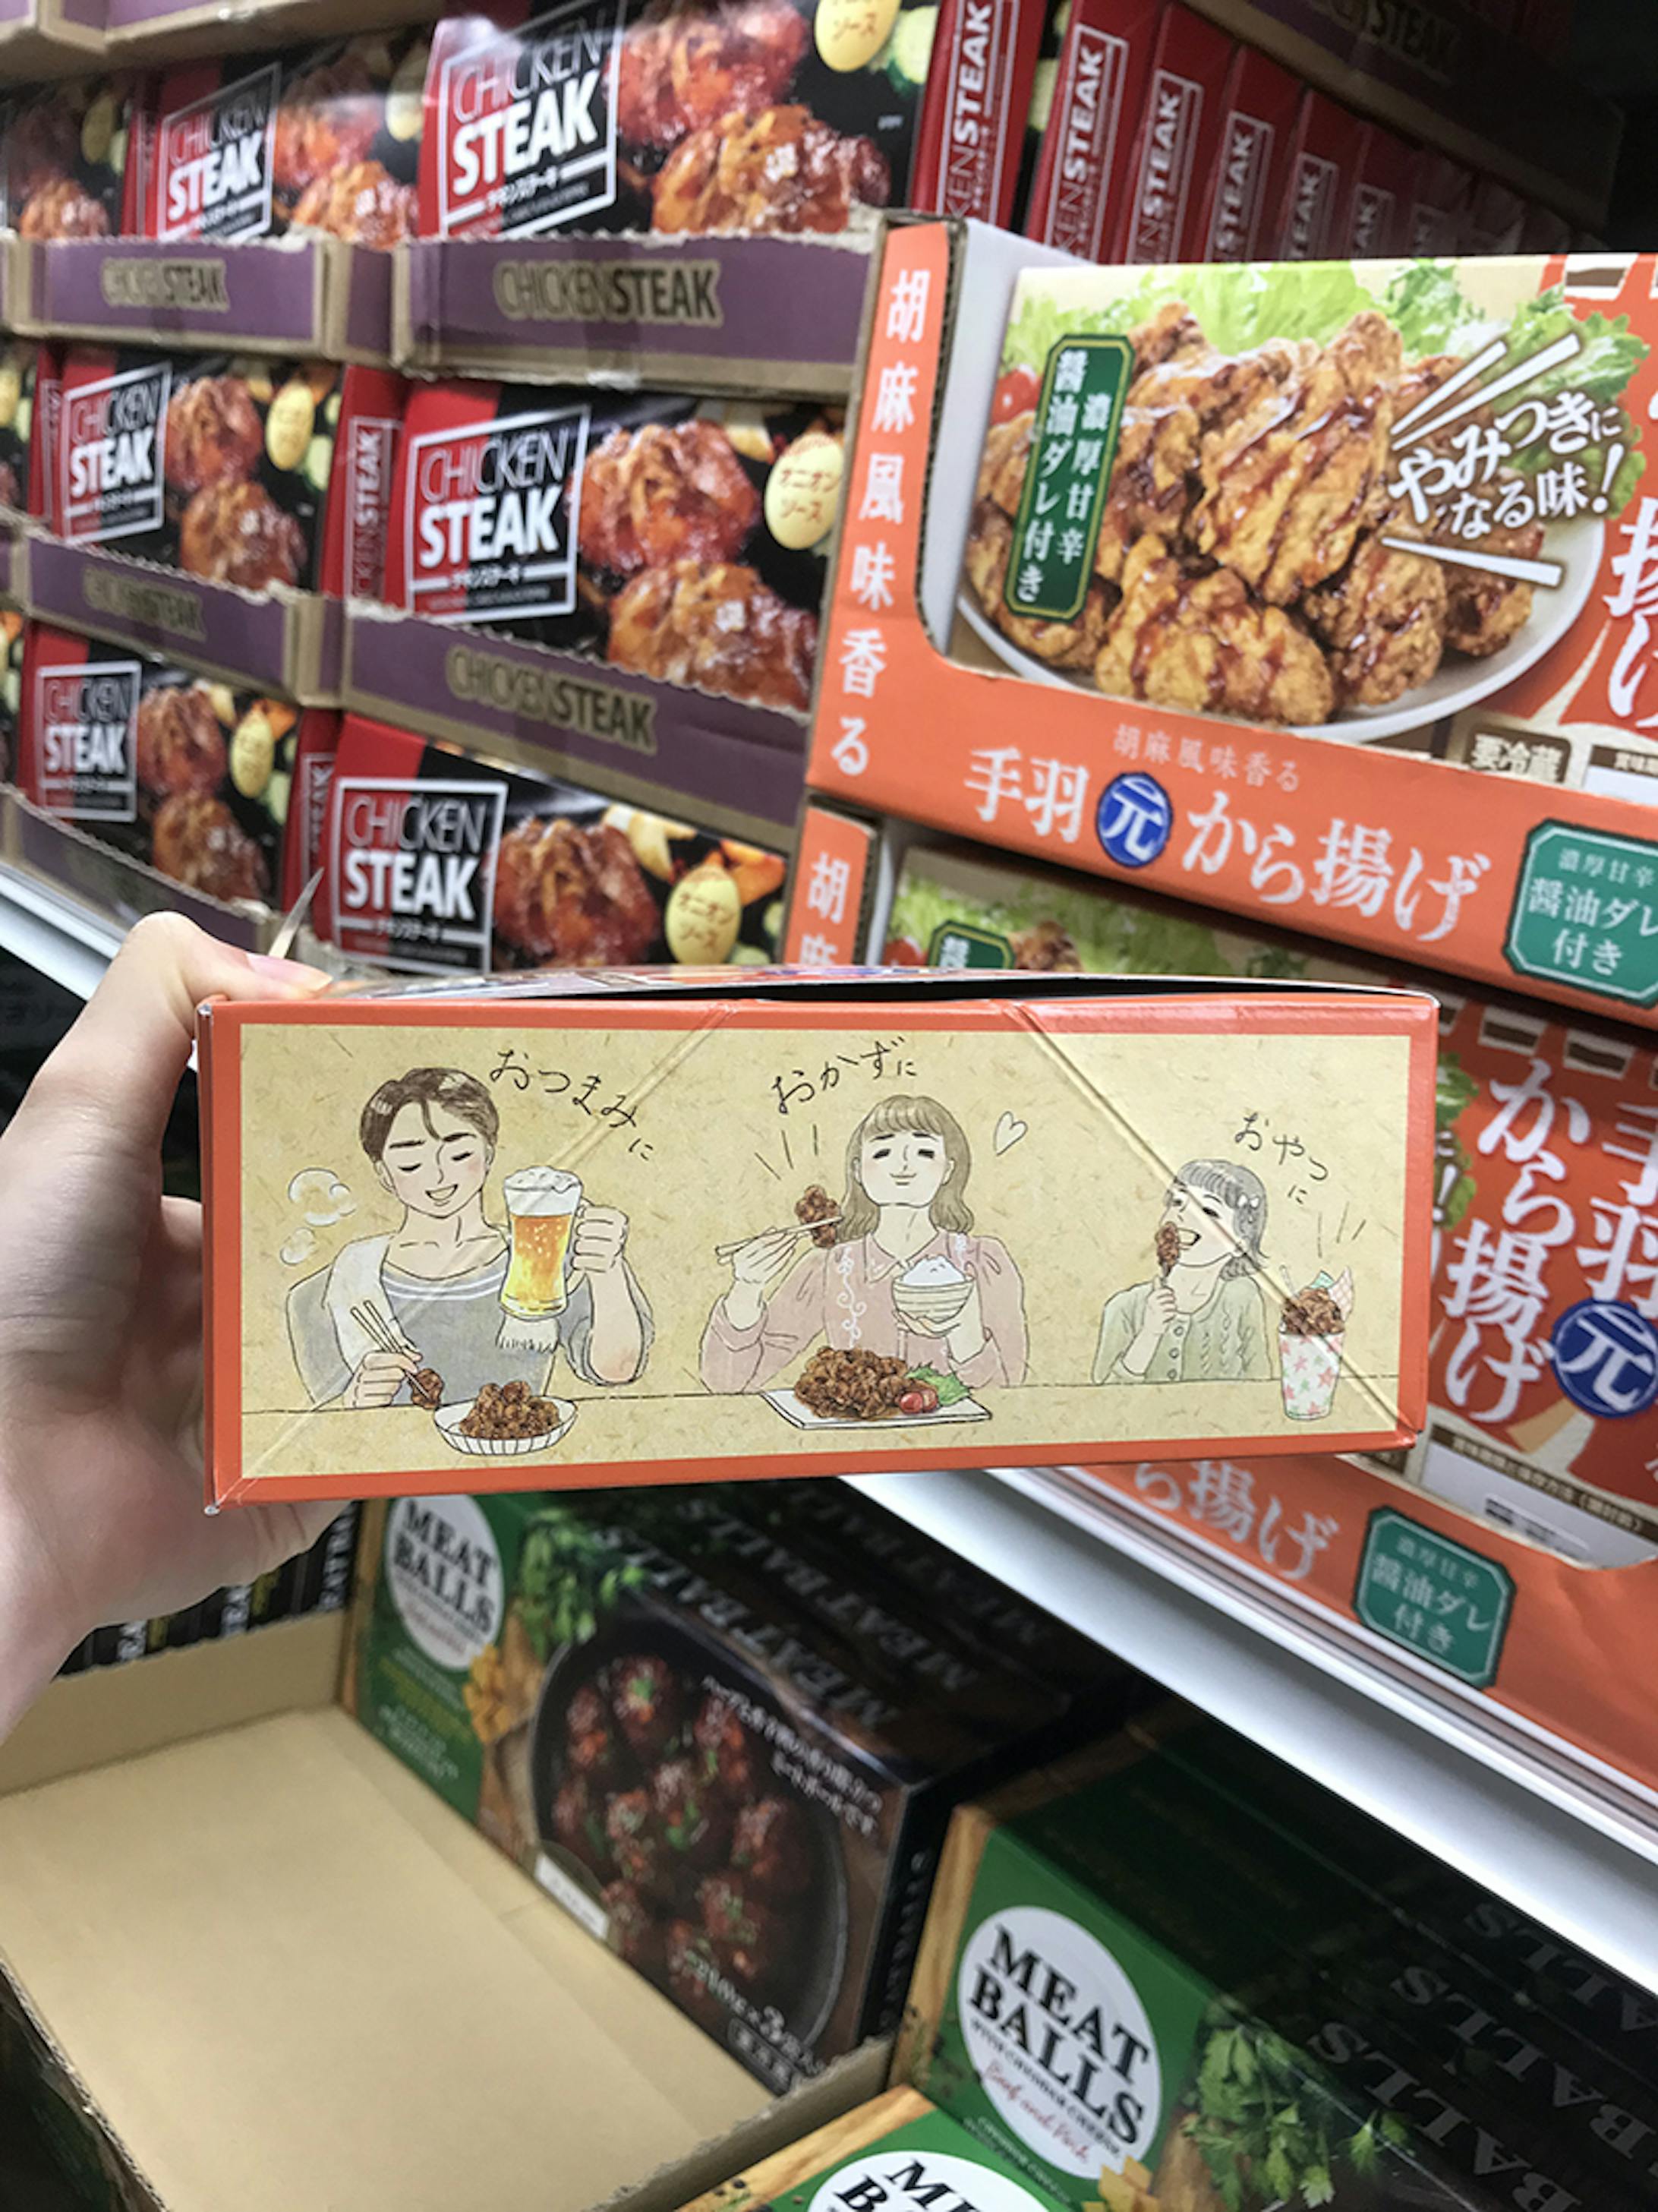 Costco package illustrations-2